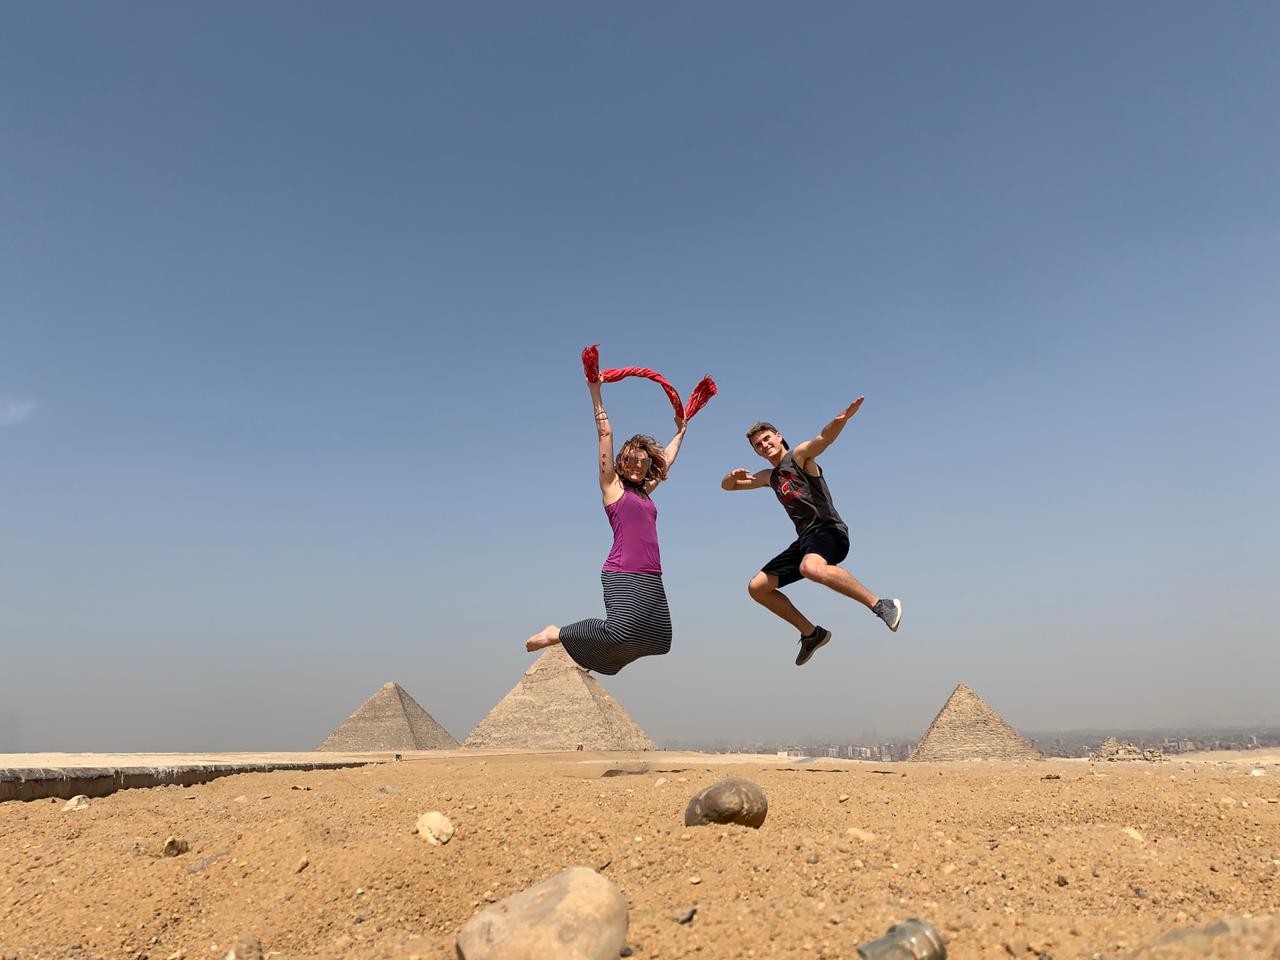 Photo session tour for 4 hrs in the pyramids